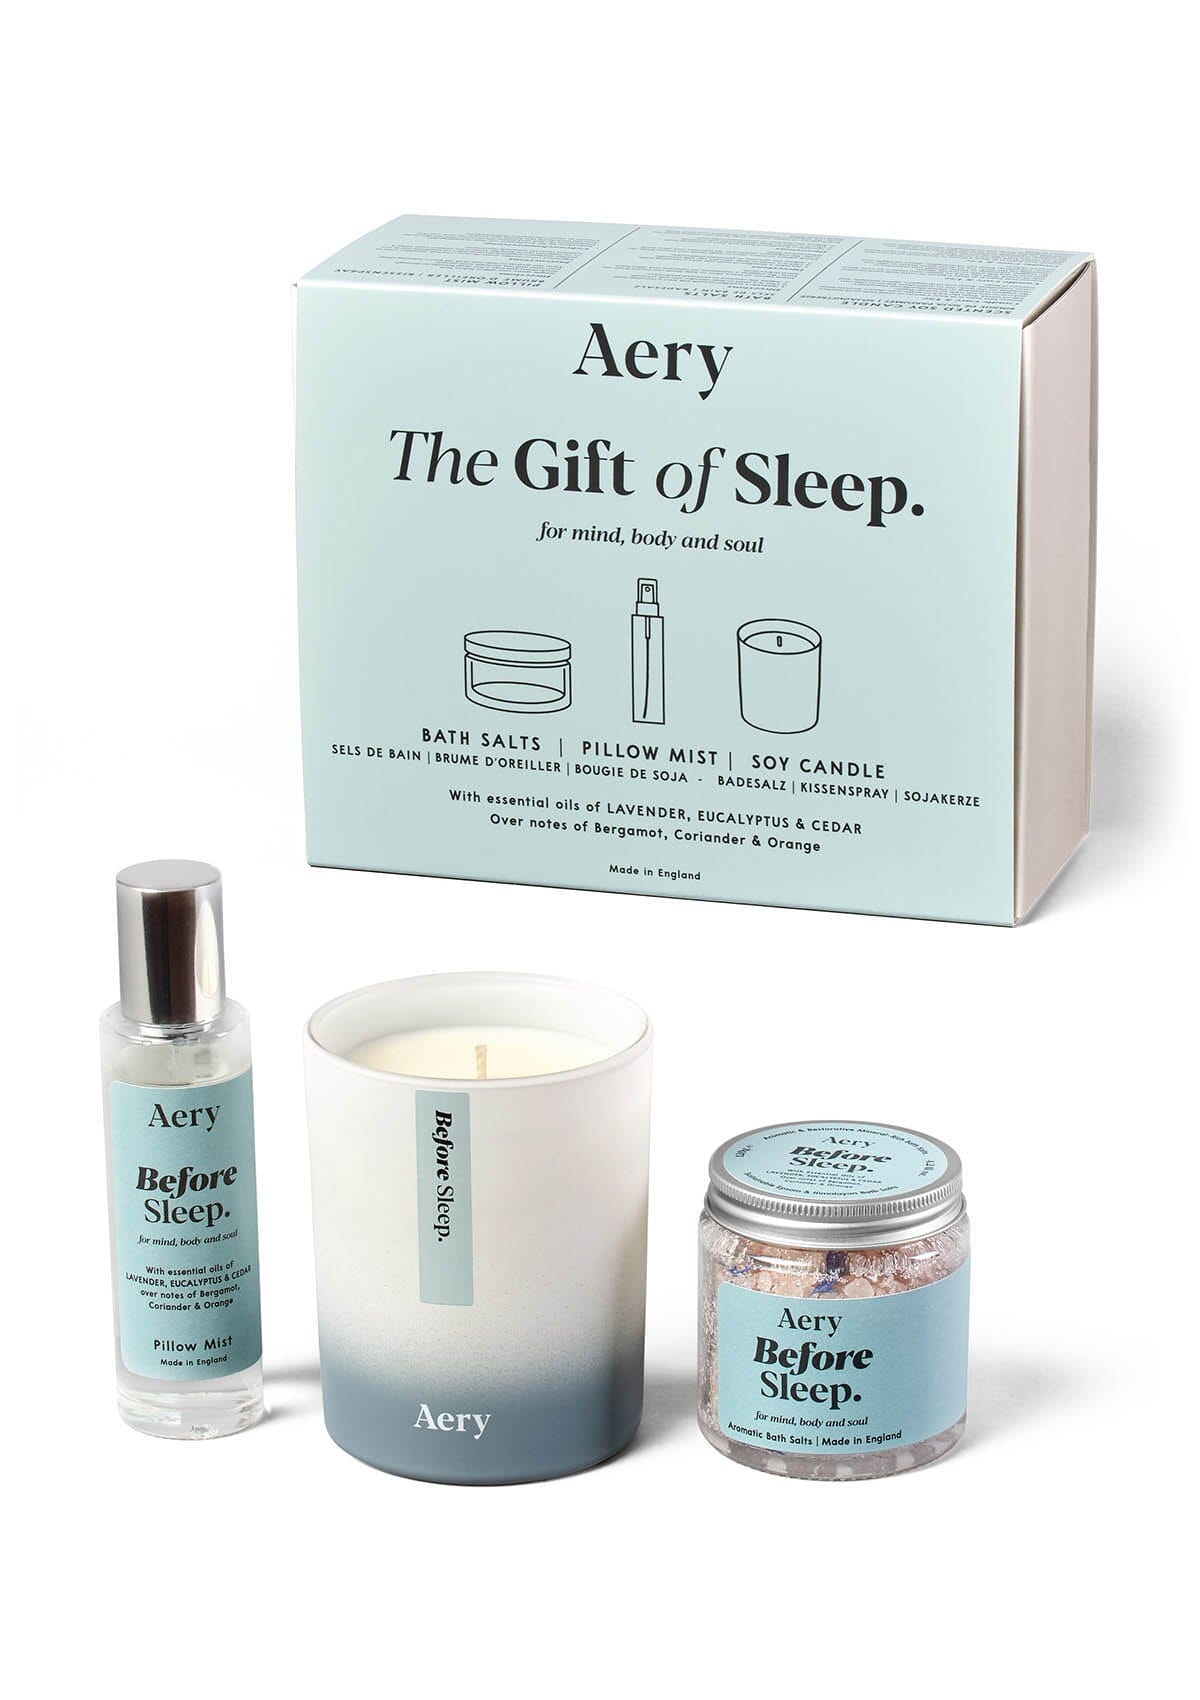 Blue Before Sleep gift set by Aery displayed next to product packging on white background 